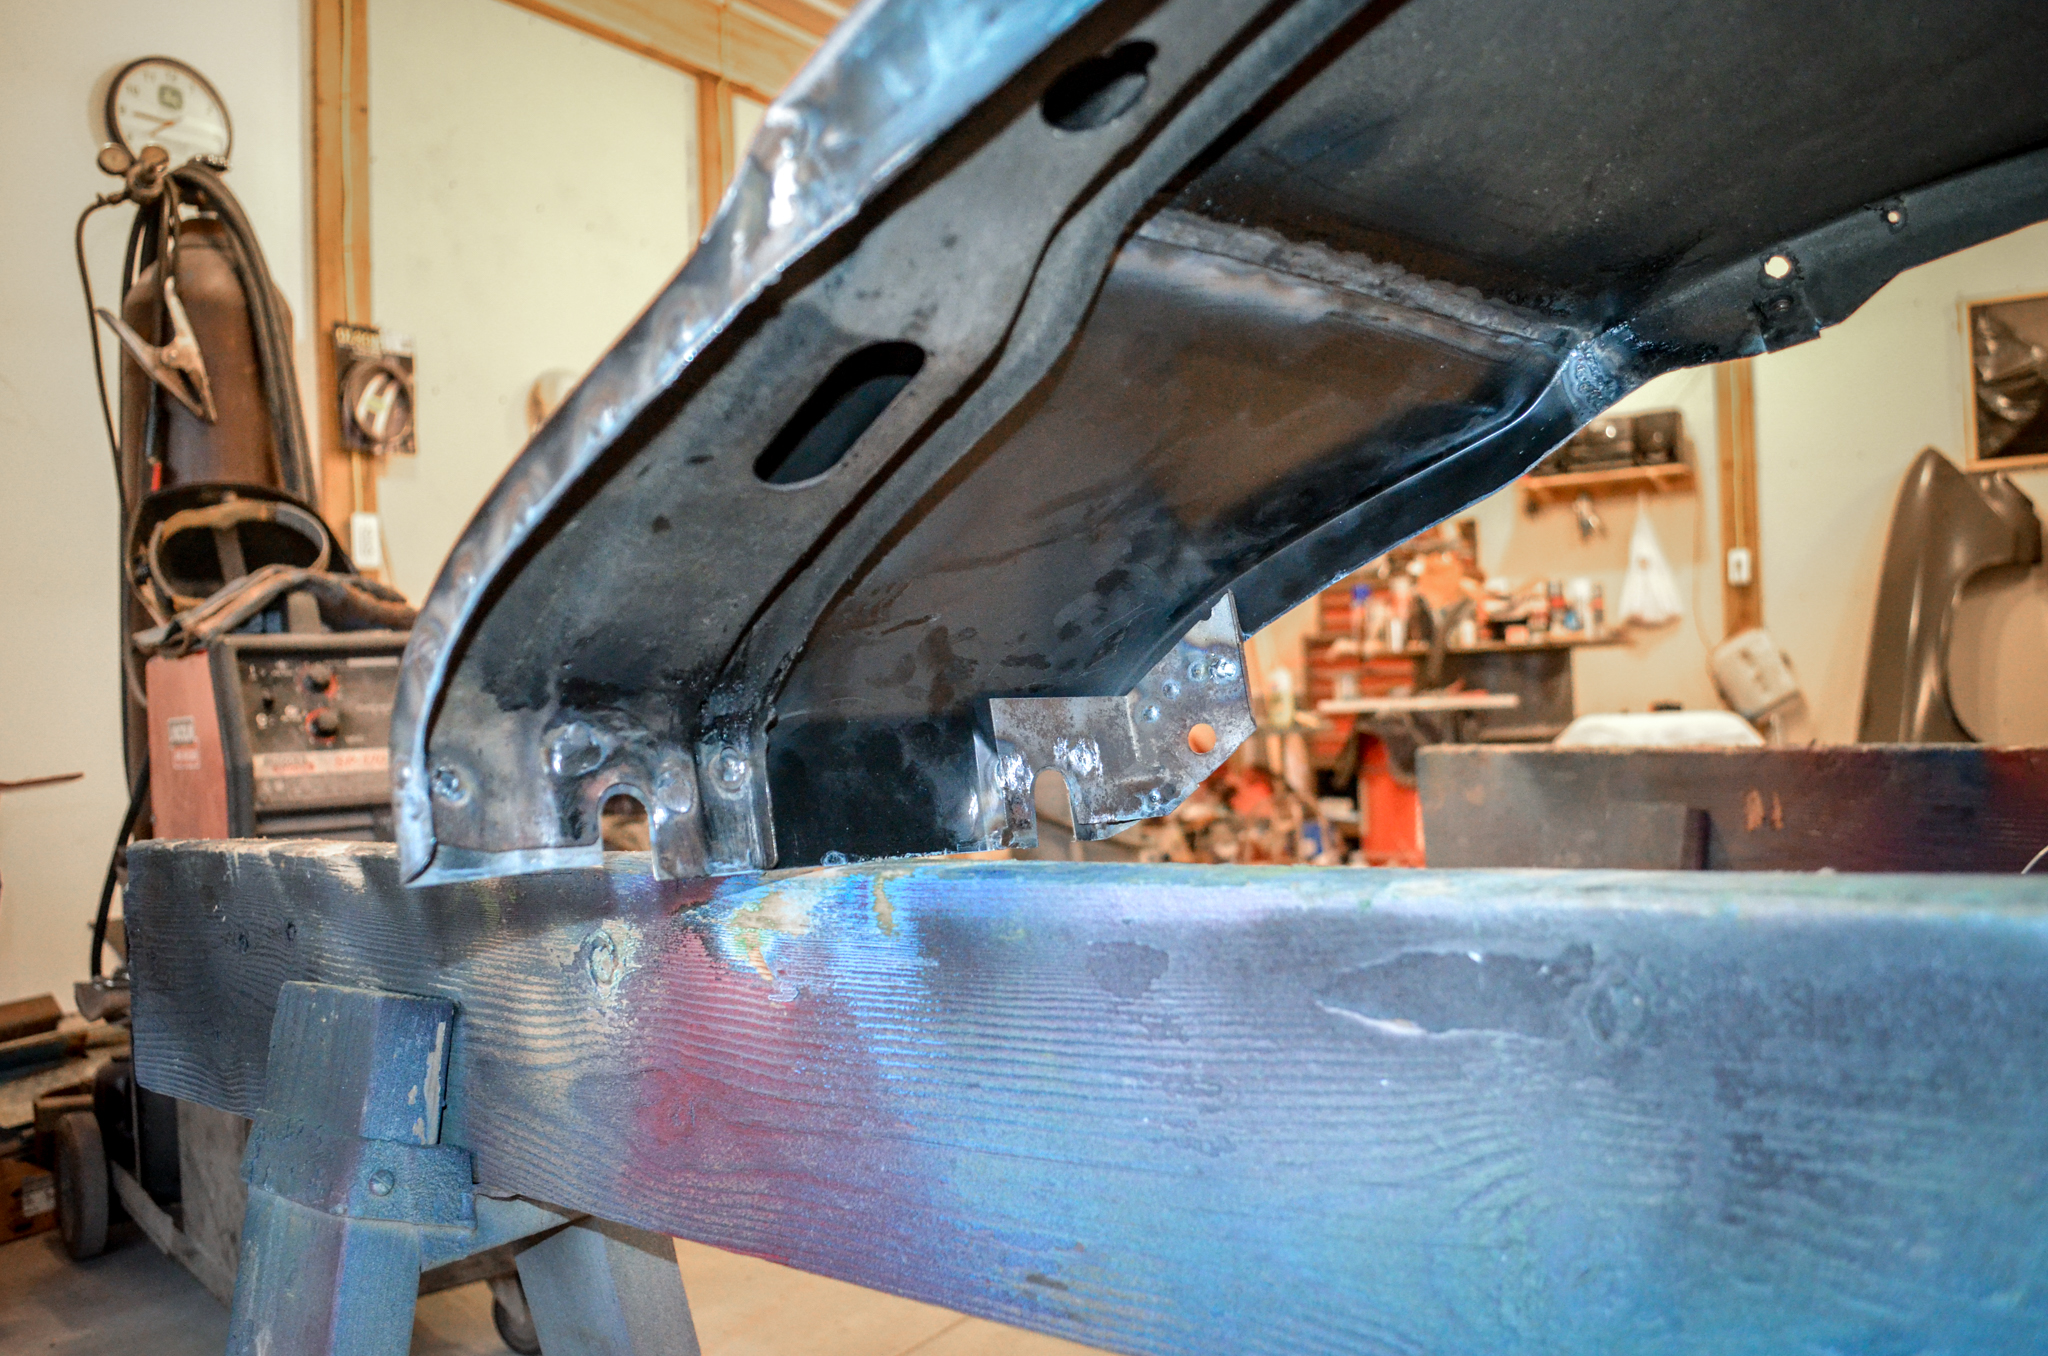 69 Chevelle Convertible - Patch panel welded to the fender and welds dressed